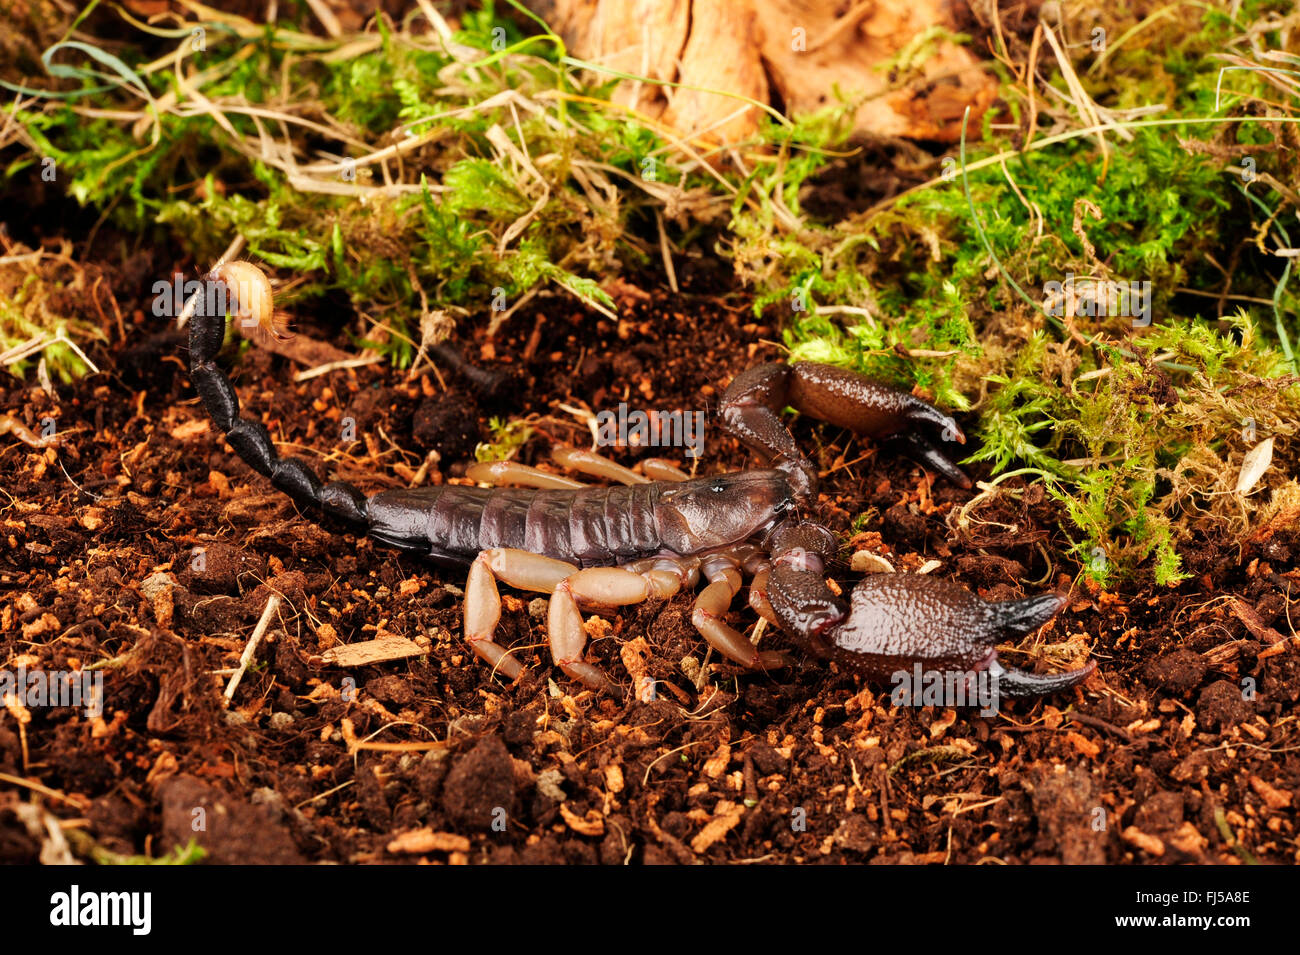 African scorpion (Opisthacanthus rugiceps), in defence posture Stock Photo